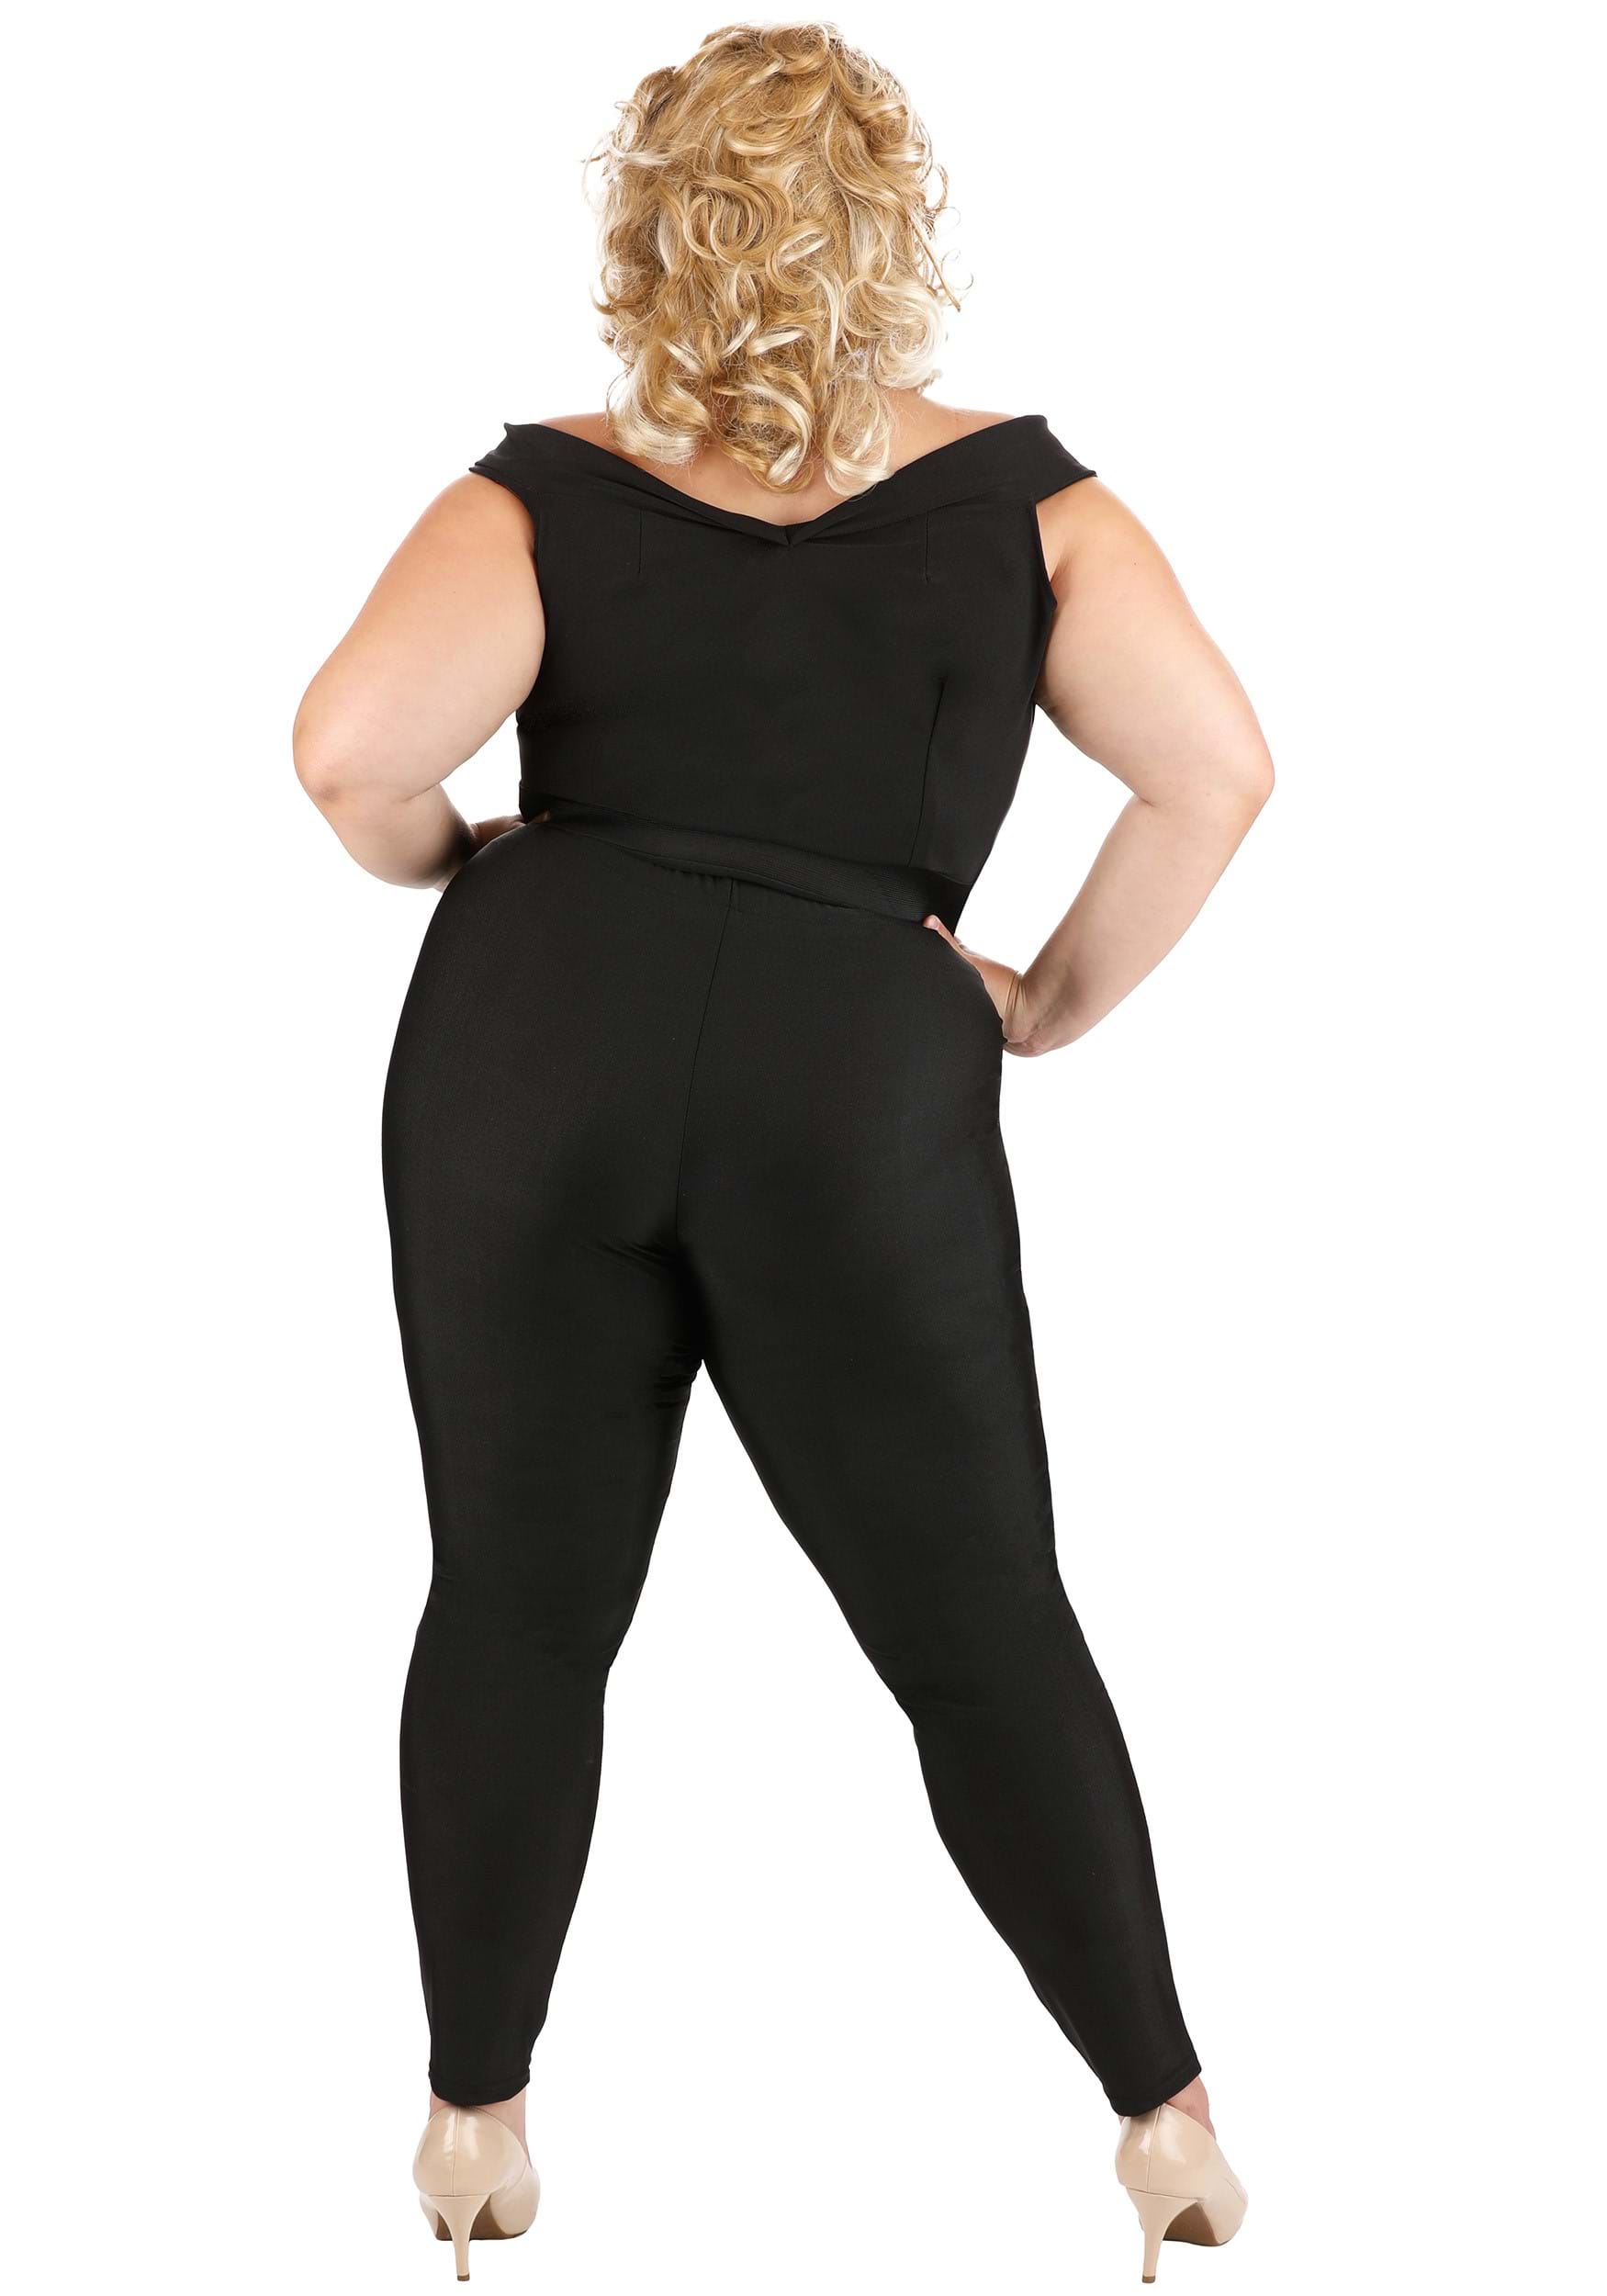 Women's Plus Size Grease Bad Sandy Costume , Women's Grease Costumes